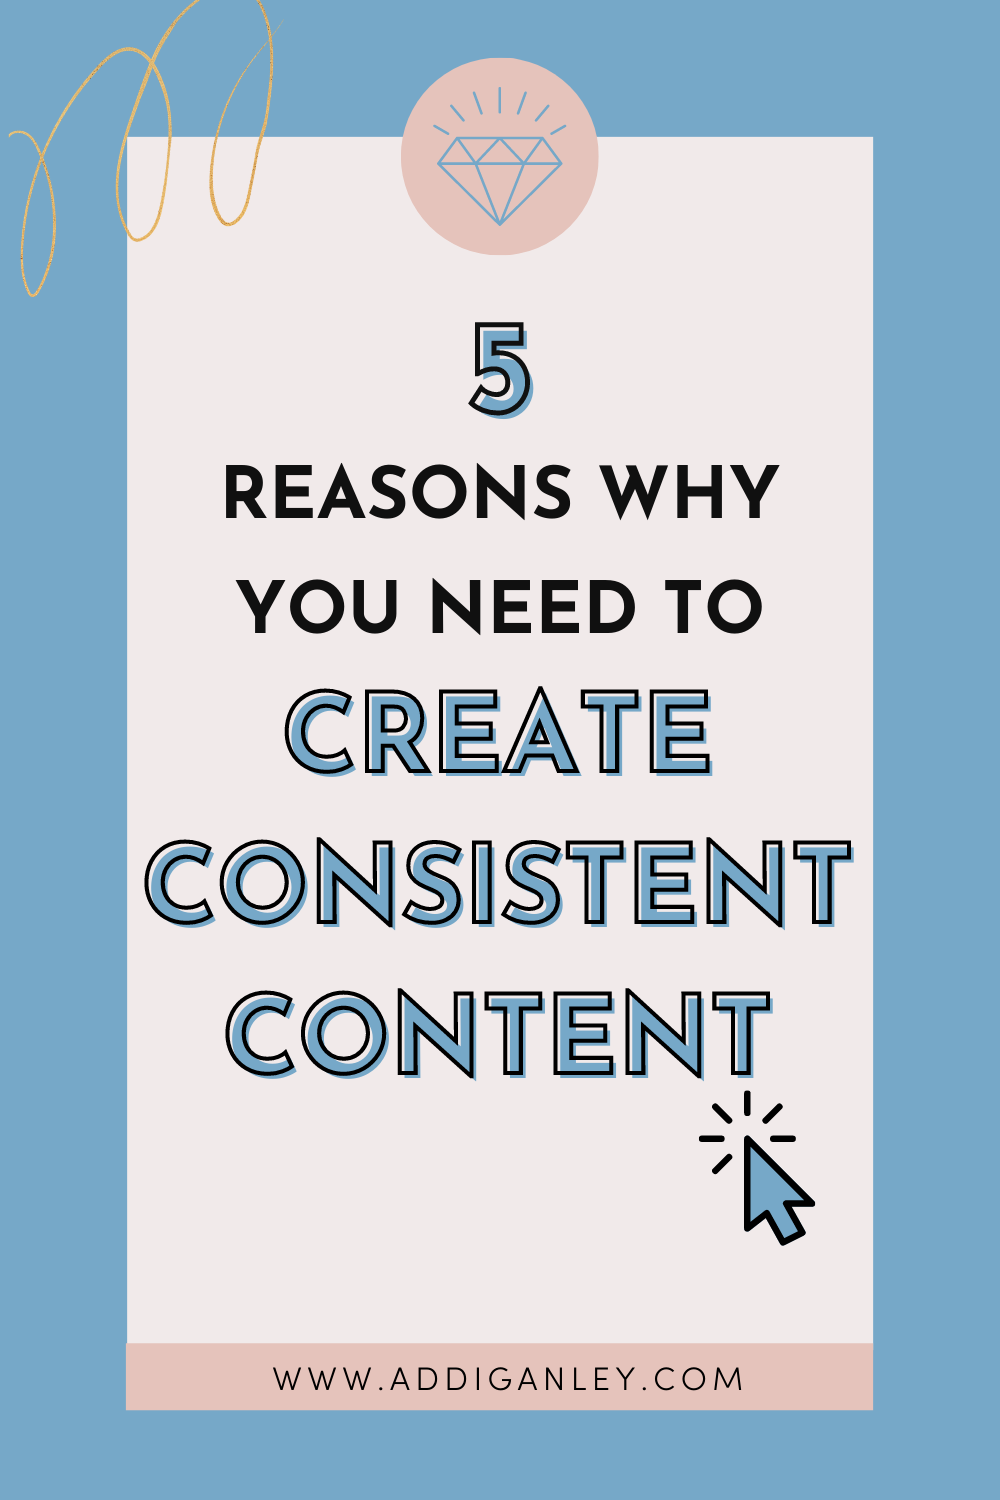 5 Causes You Have to Create Constant Content material